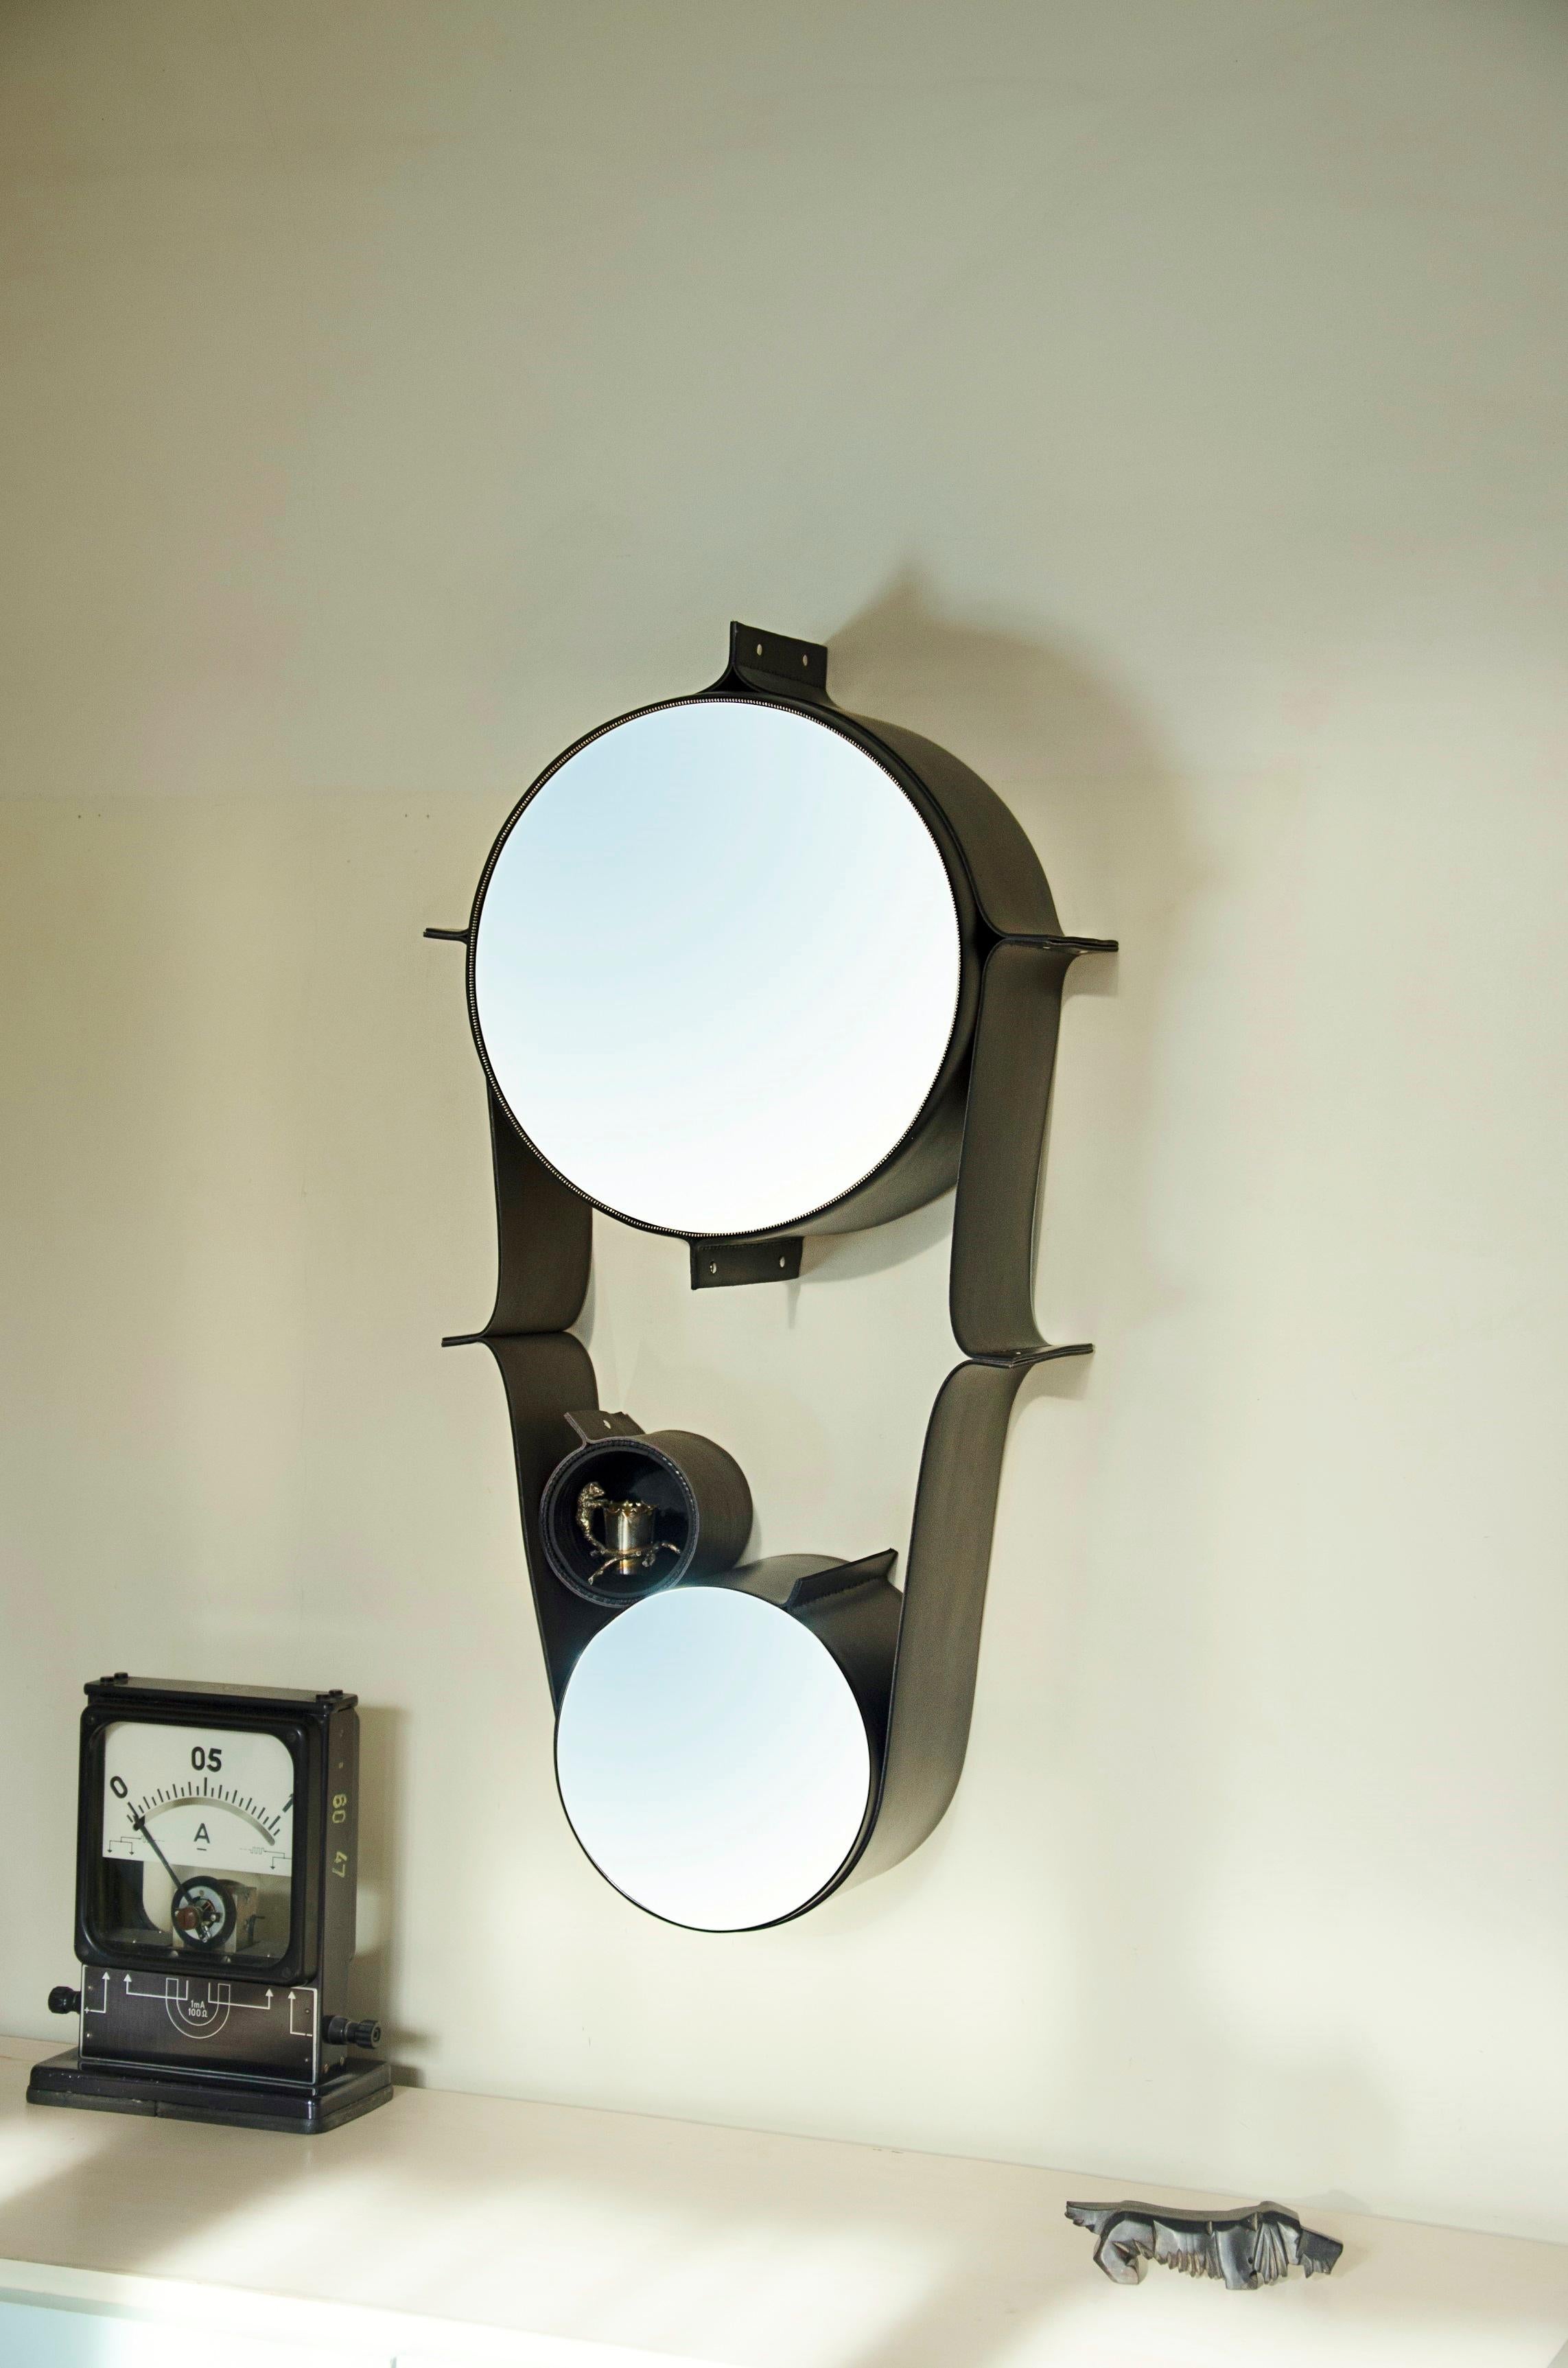 Large wall double mirror wrapped in leather
One large wall-mounted mirror (30cm/11.811 inches), surrounded by a leather staps on which two mobiles “box mirrors” (20cm/7.87 inches, 16cm/6.29 inches) are harmoniously laid at opposite ends of the